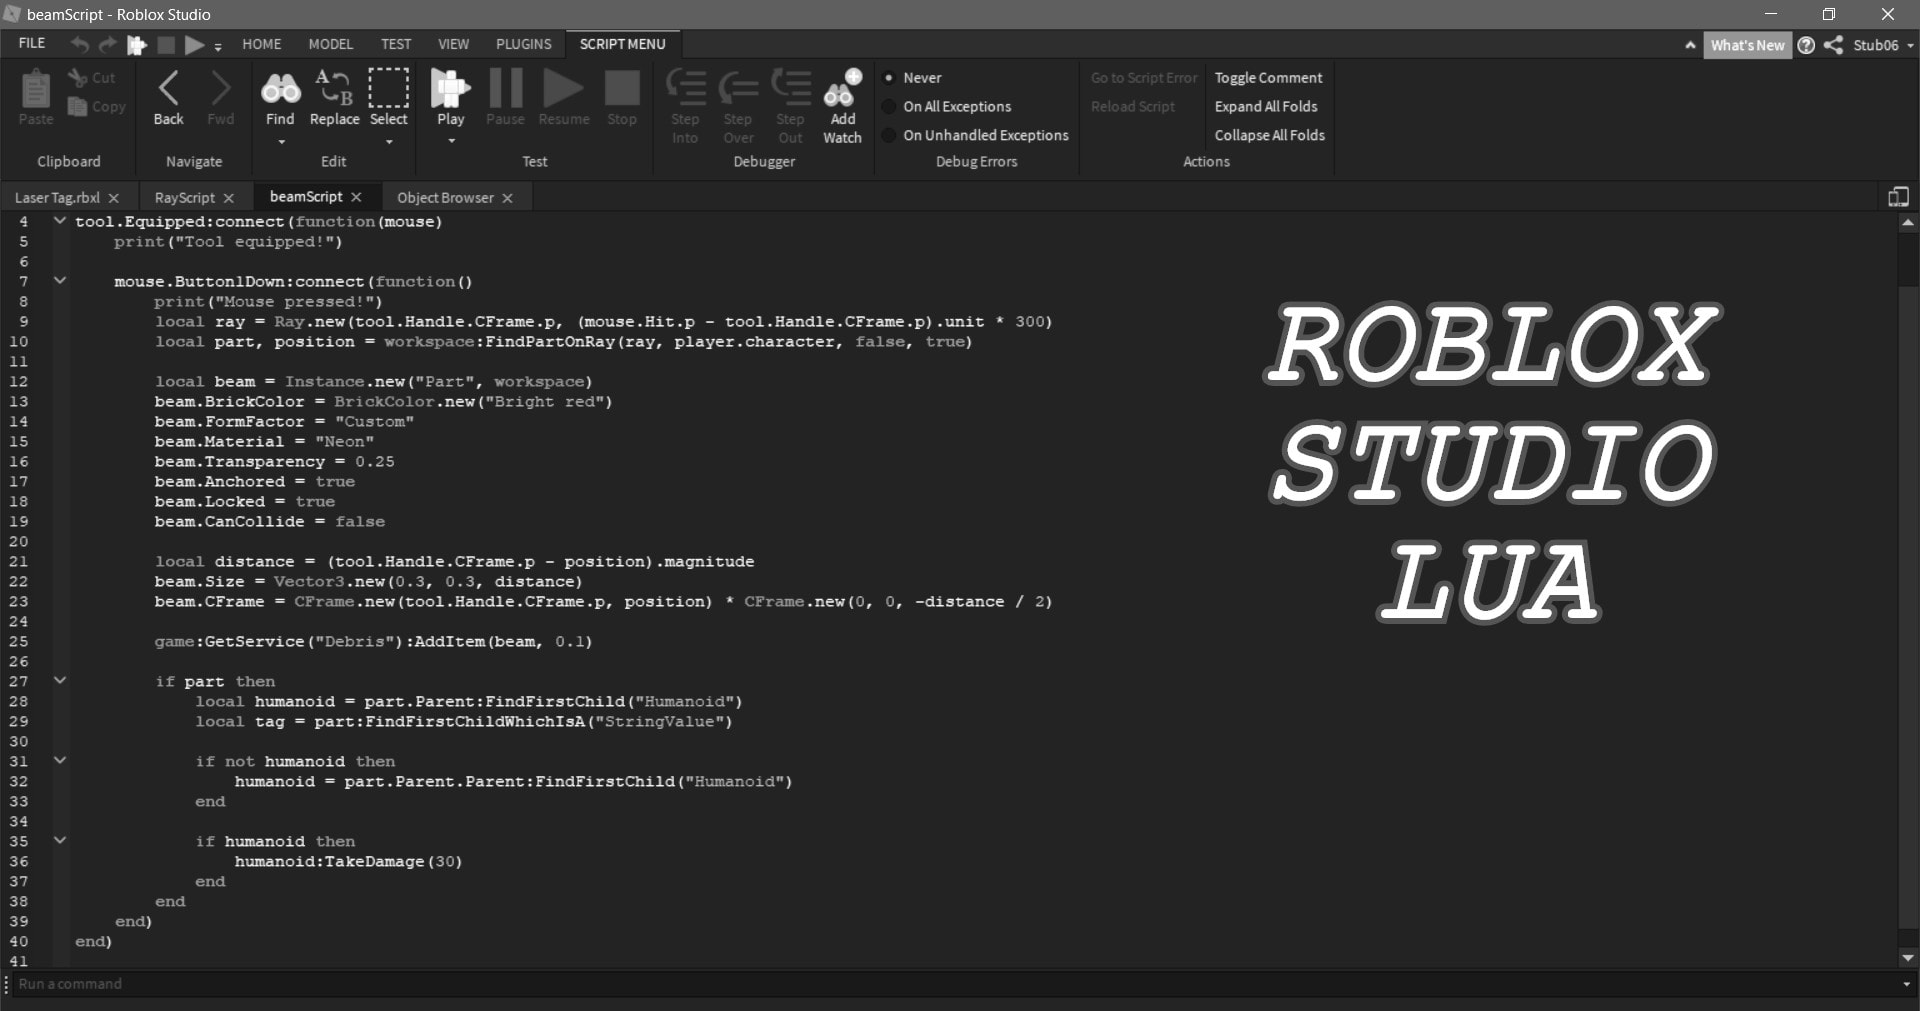 Code Cool Features And Such For You In Roblox Studio By Stub06 Fiverr - roblox studio code book